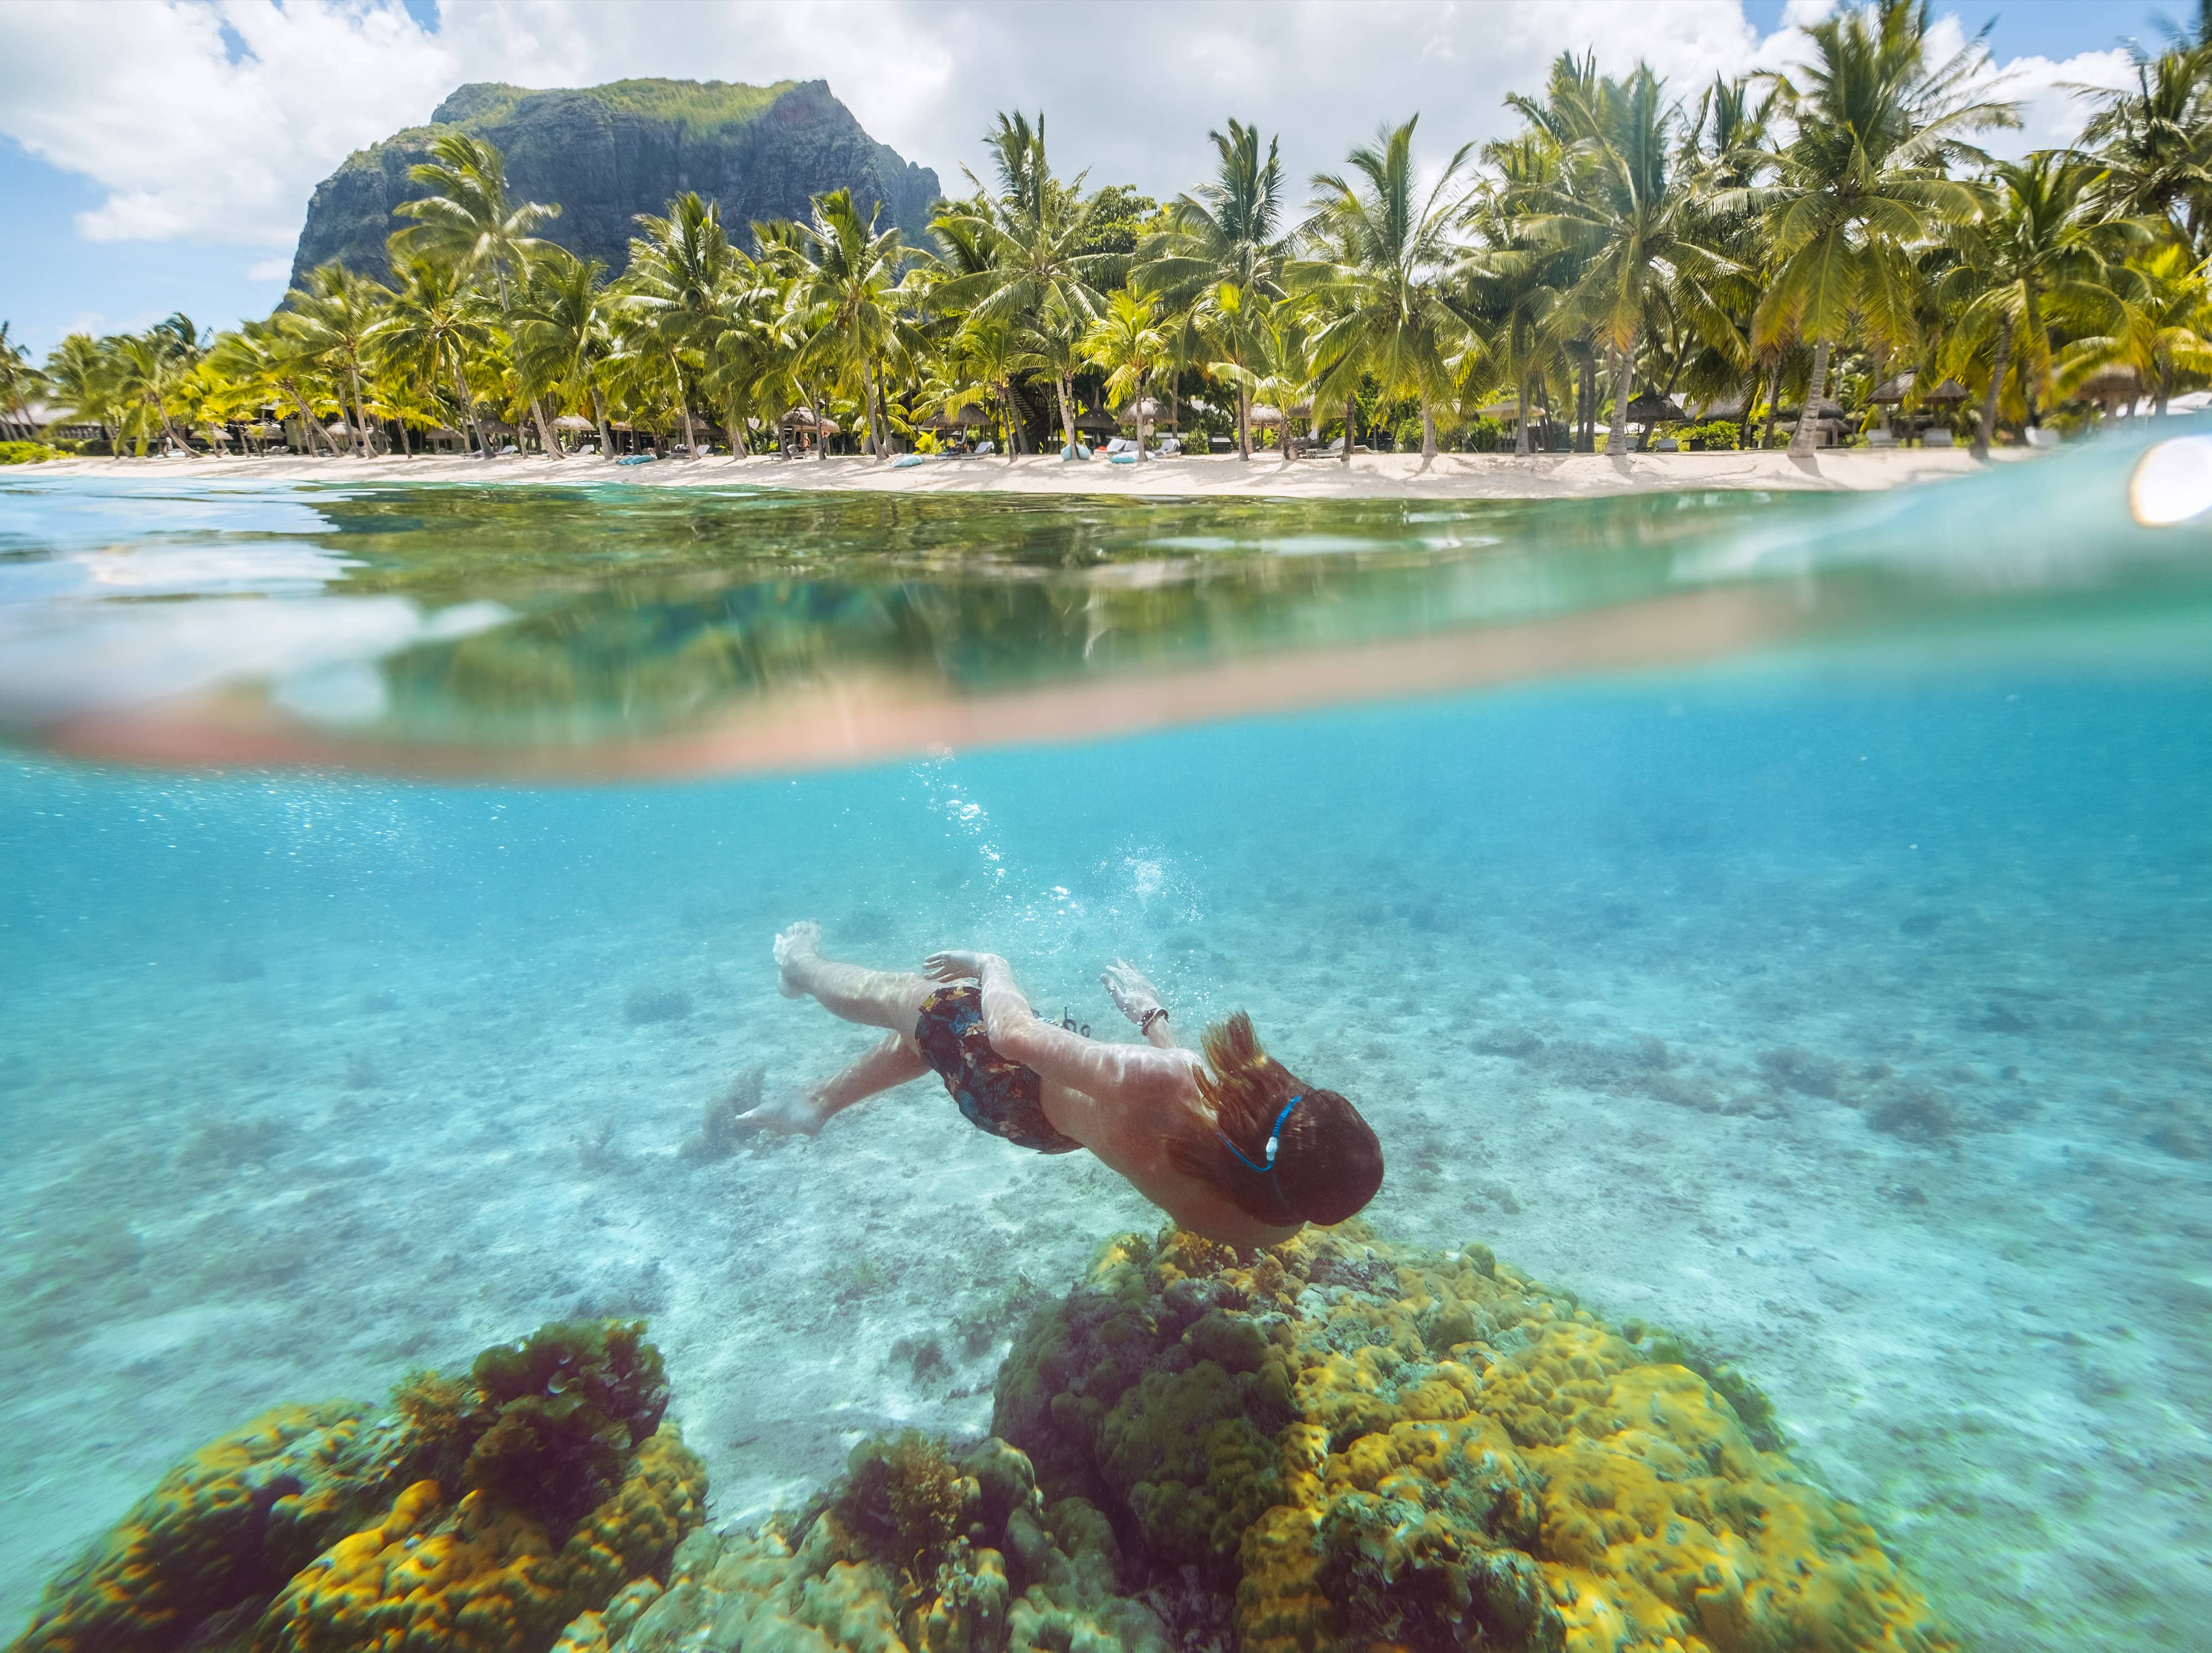  Explore island lagoons on a snorkelling excursion.  